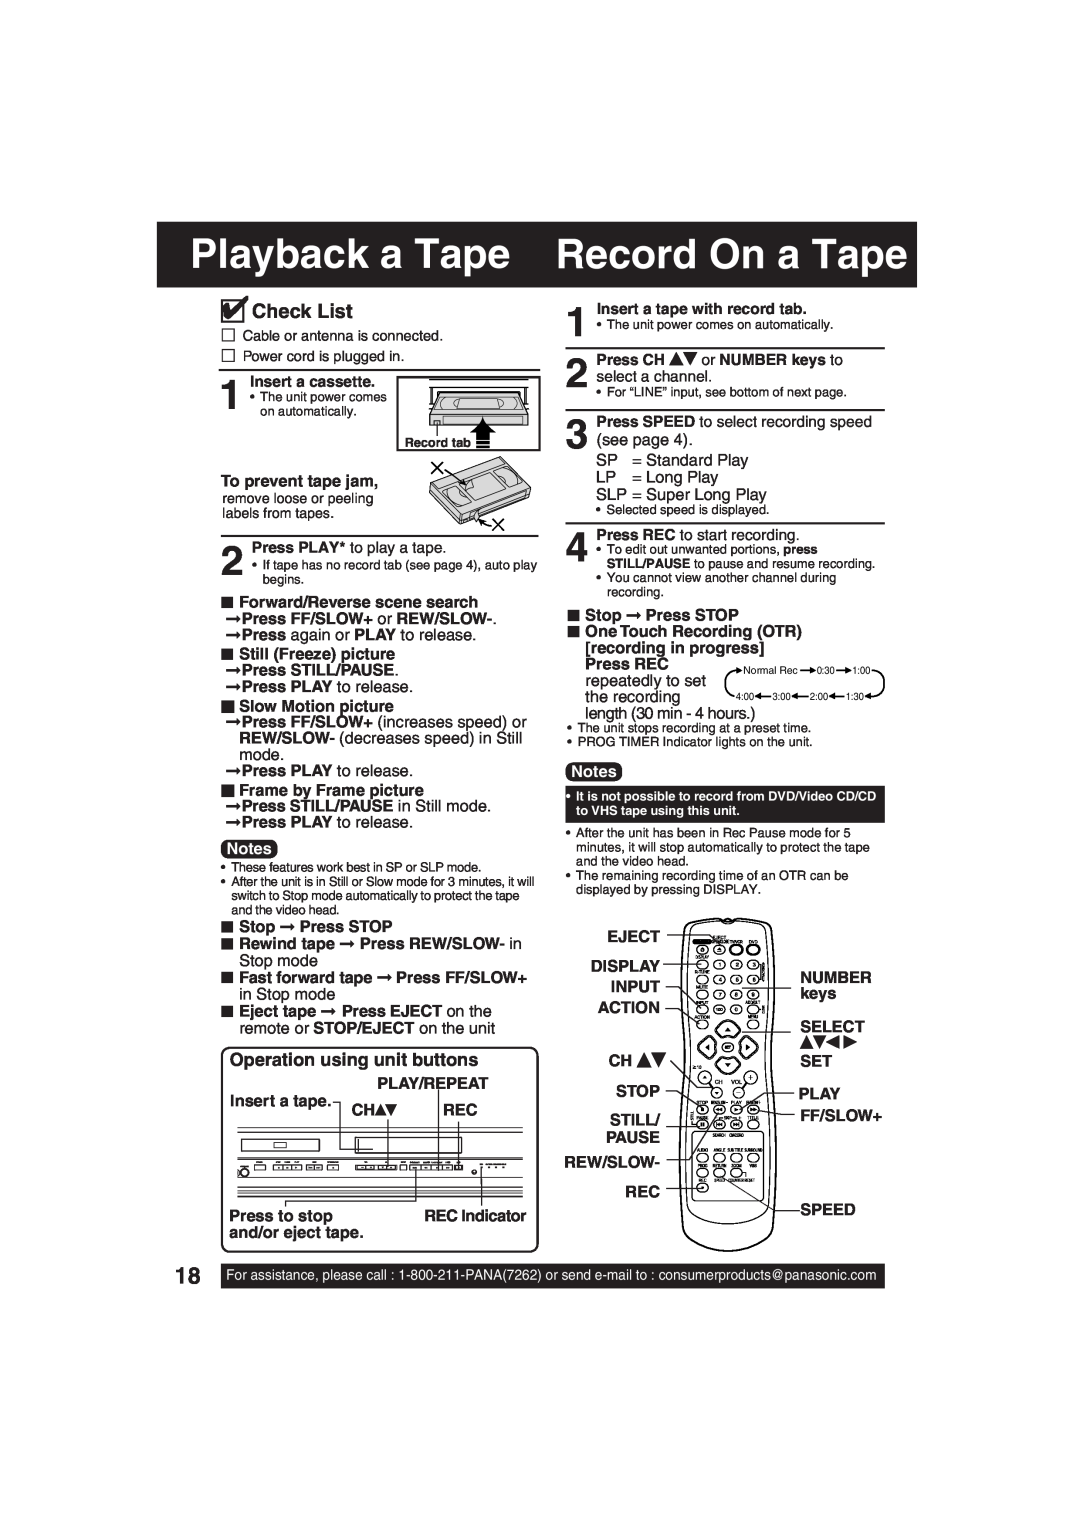 Panasonic PV-DF203 Playback a Tape Record On a Tape, Operation using unit buttons, To prevent tape jam, Stop Press STOP 